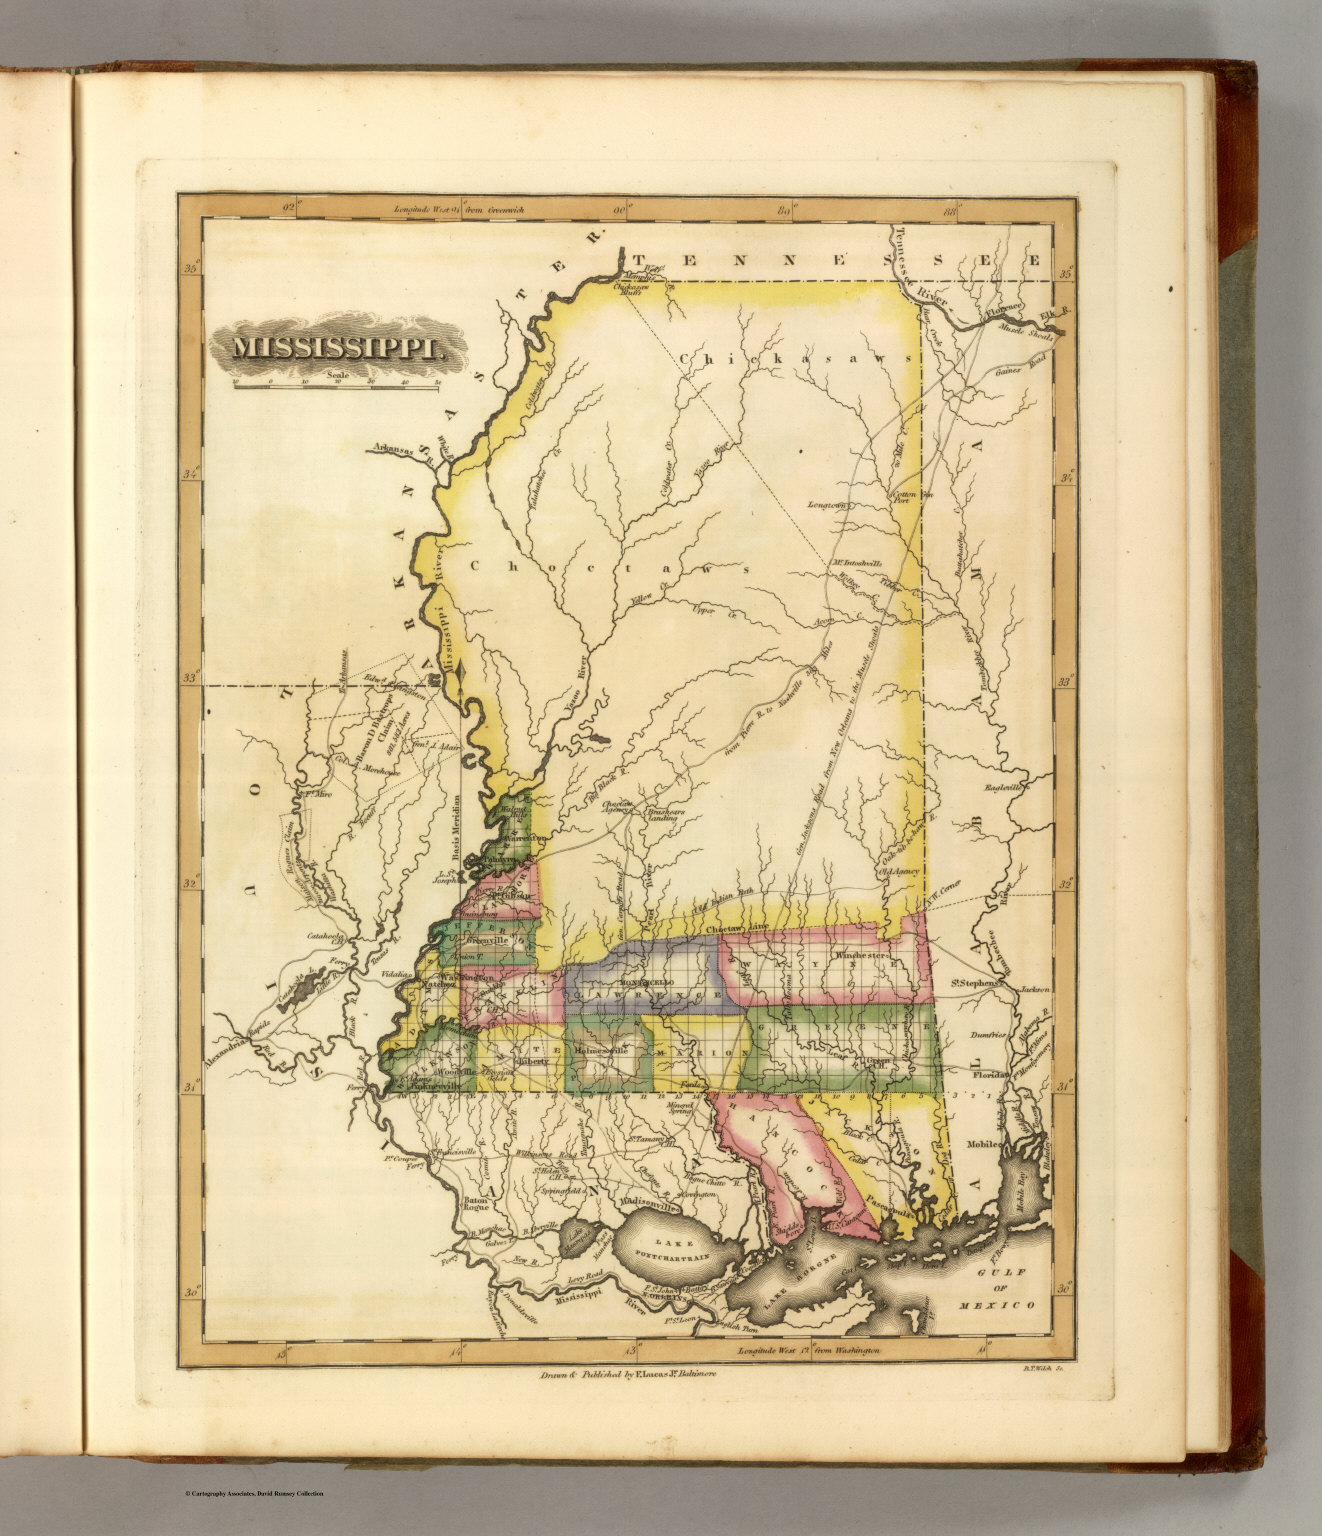 Mississippi David Rumsey Historical Map Collection 8672